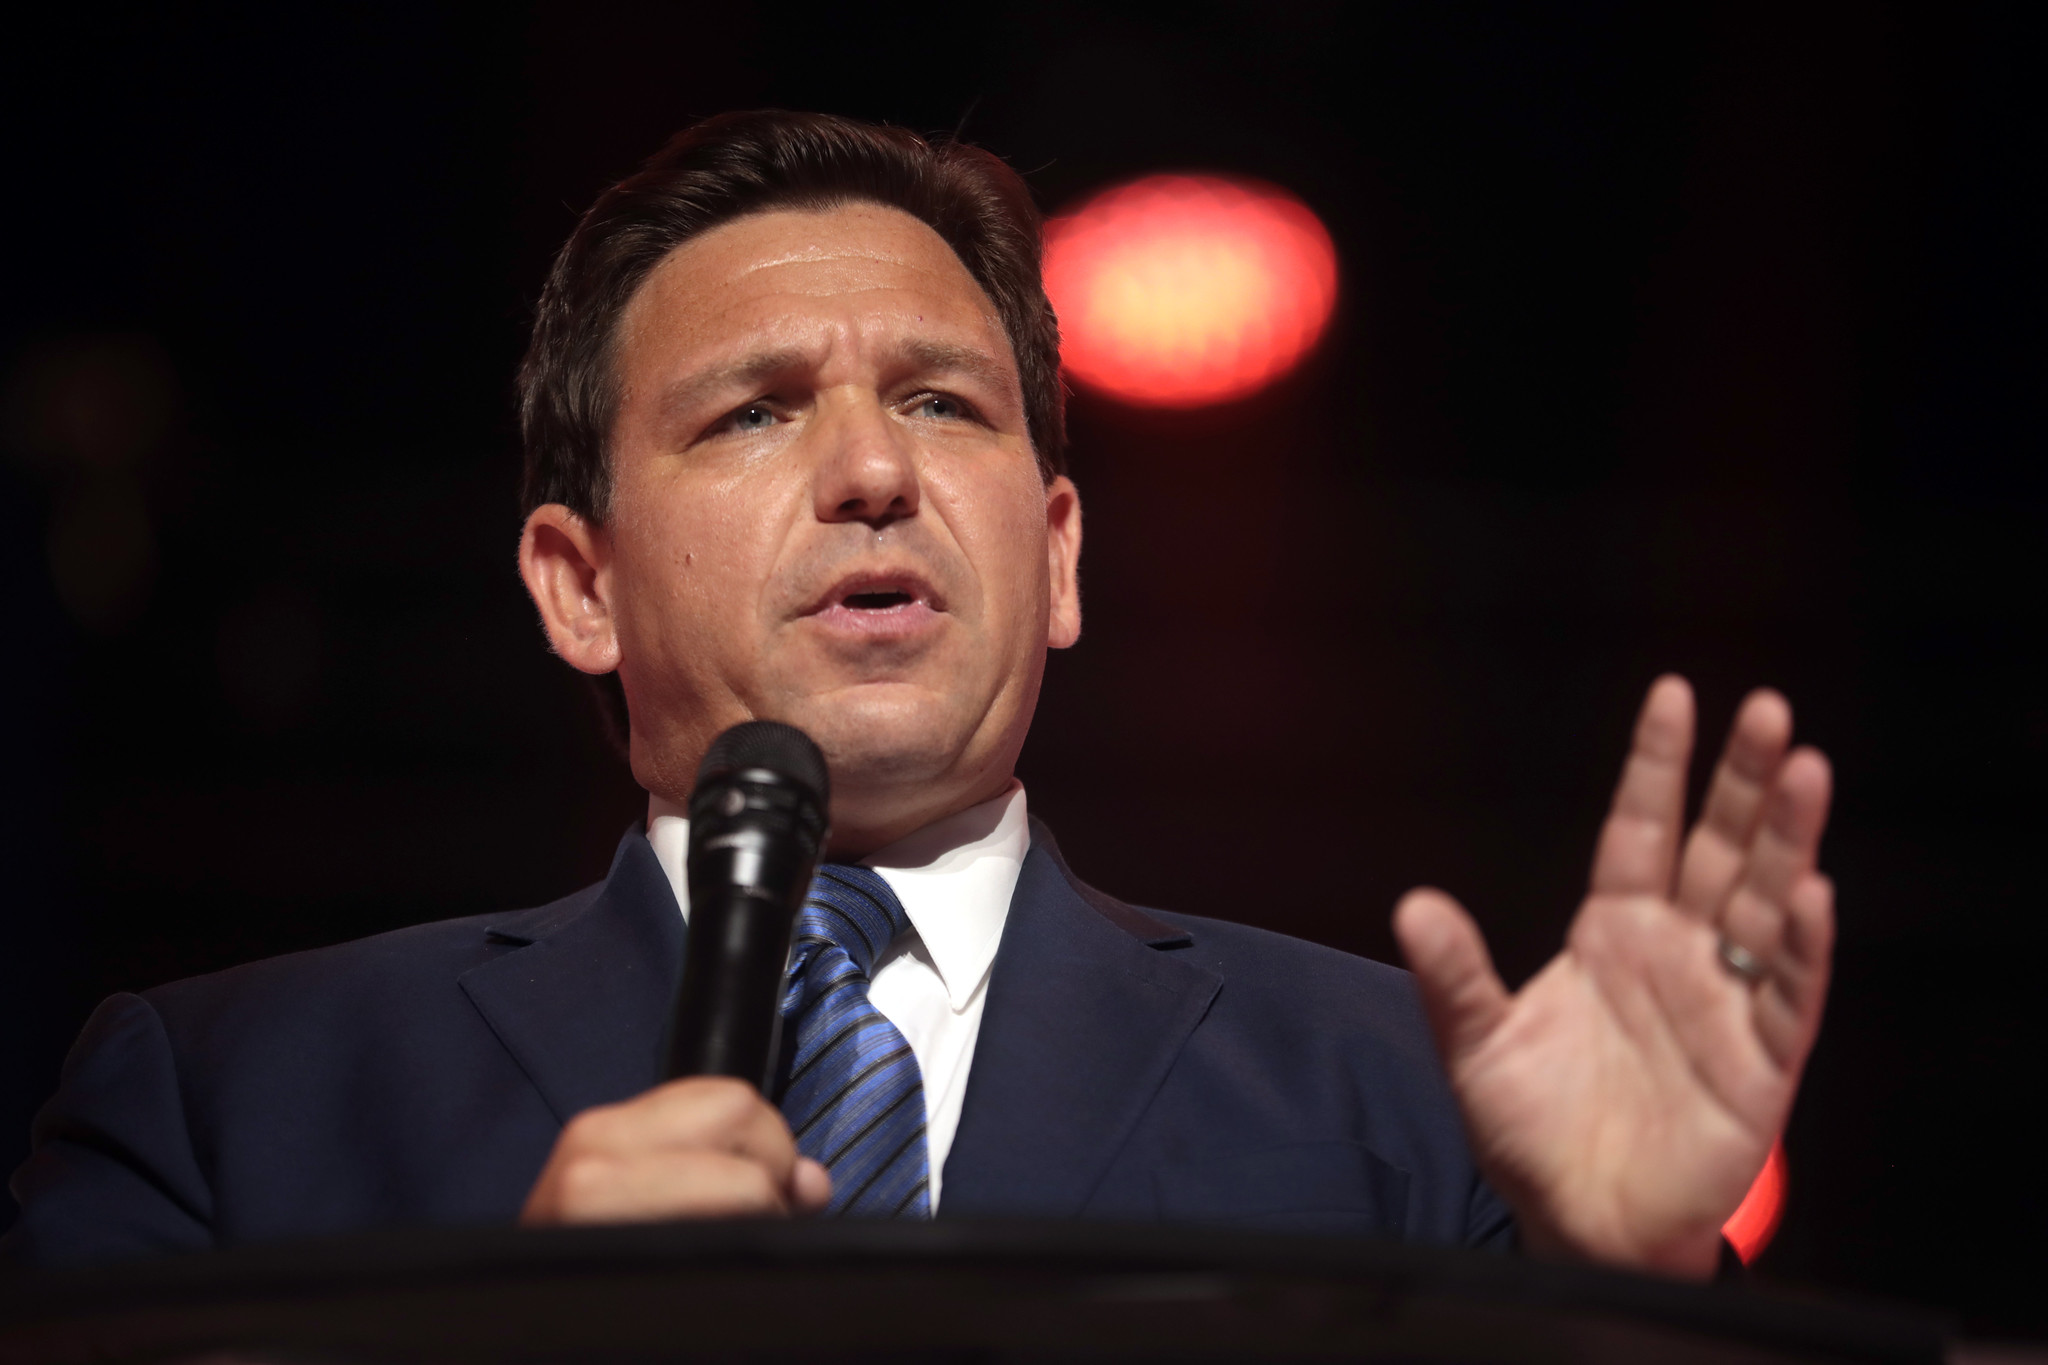 Governor Ron DeSantis speaking with attendees at the 2022 Student Action Summit at the Tampa Convention Center in Tampa, Florida (by Gage Skidmore CC BY-SA 2.0 via Flickr).